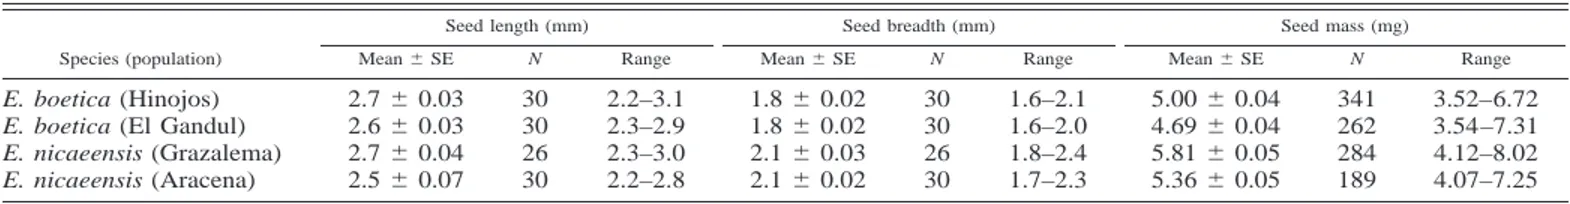 TABLE 2. Characteristics of ecarunculate seeds of Euphorbia boetica and E. nicaeensis in the studied populations